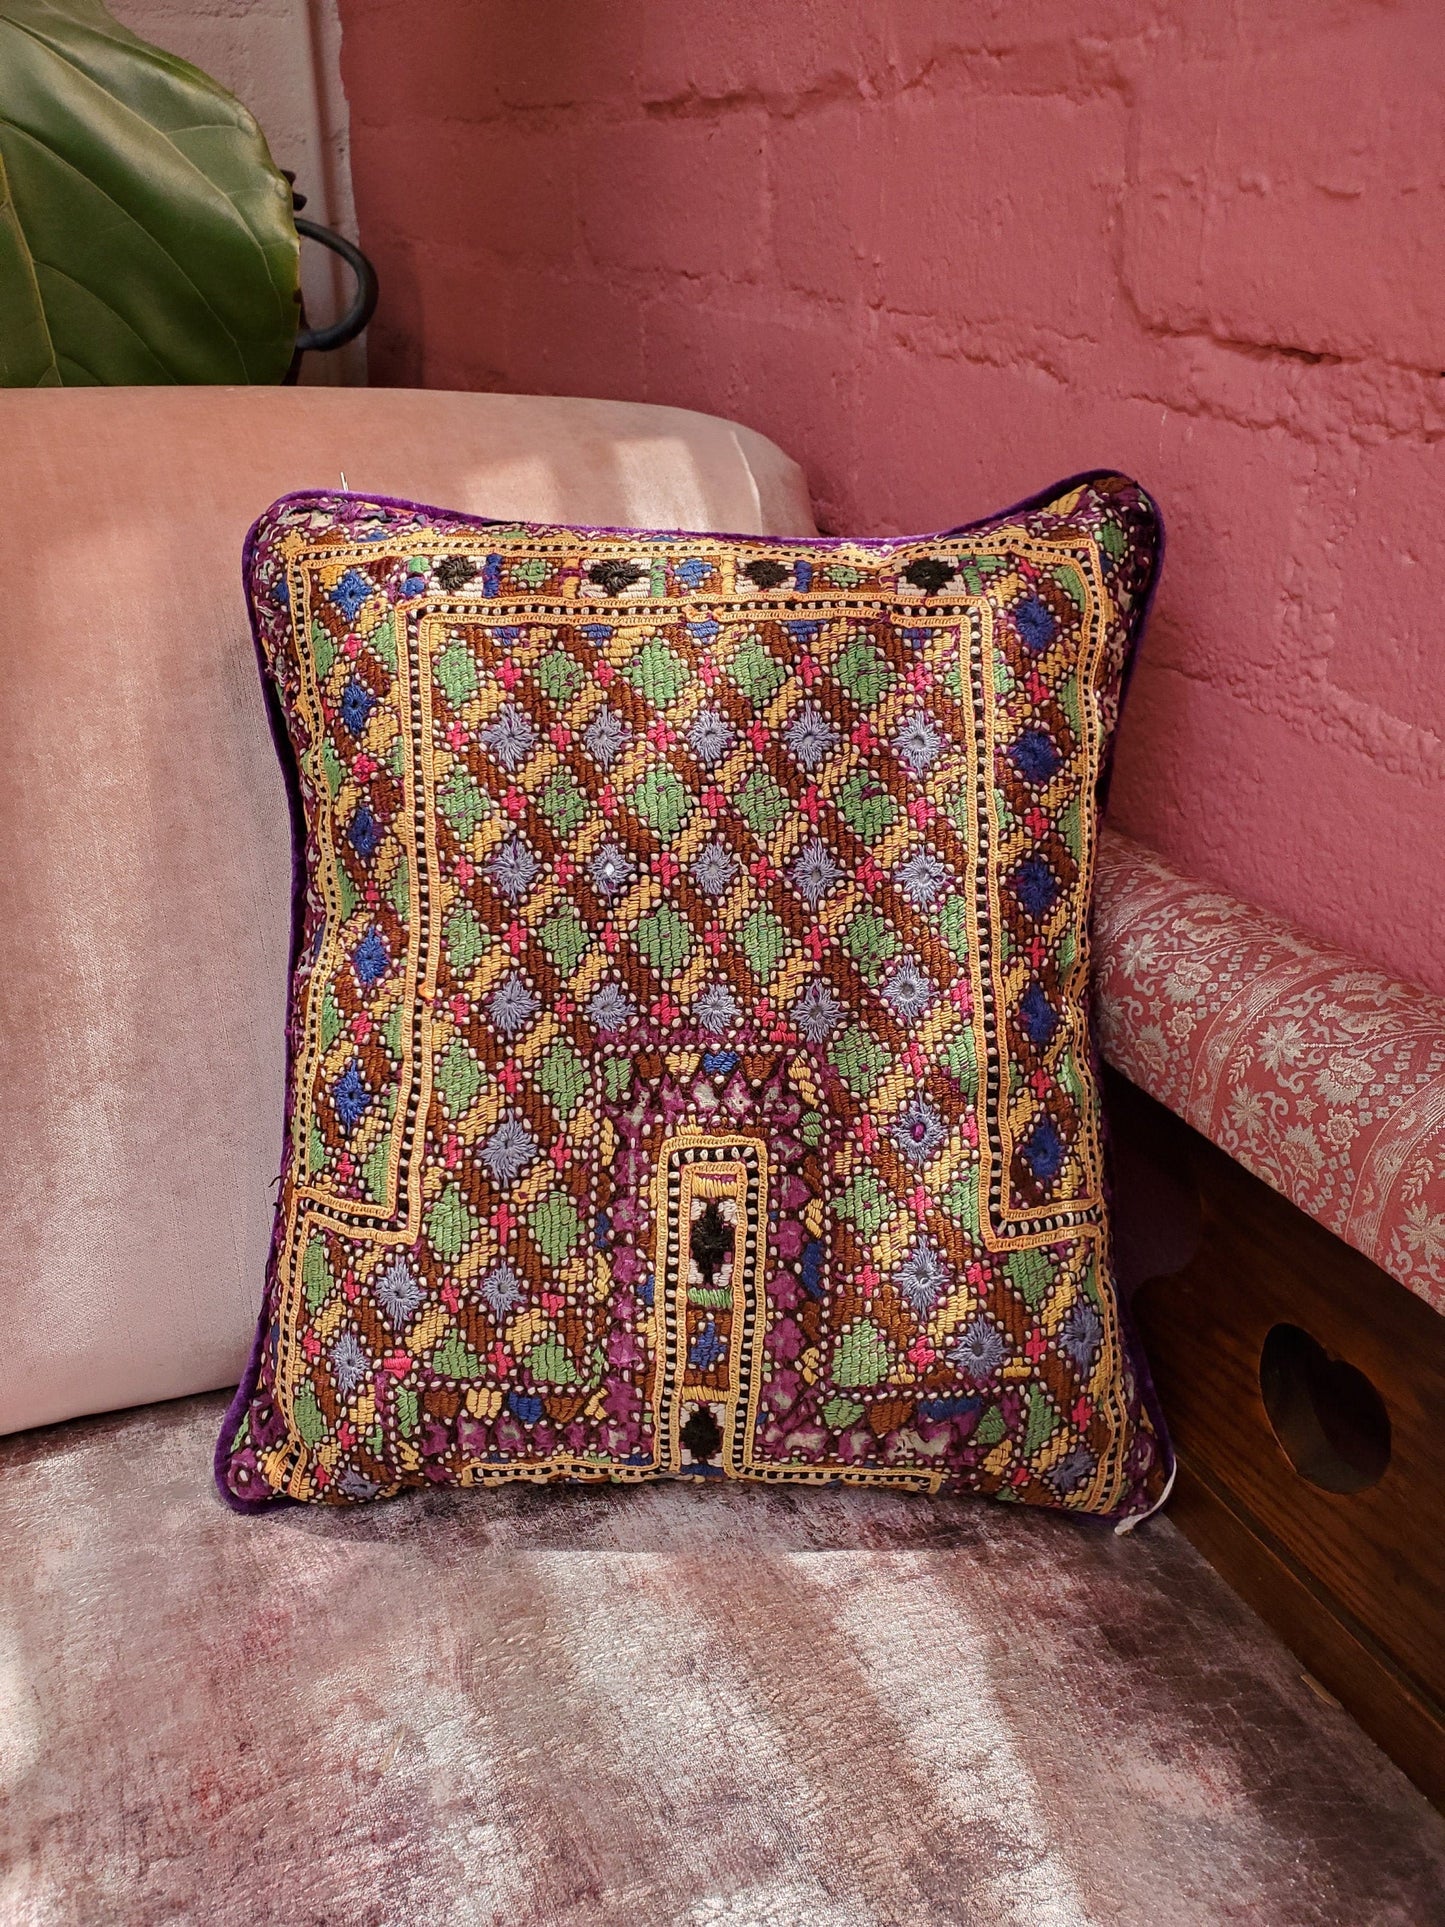 Multicolored Embroidered Indian Bohemian Velvet Vintage Patchwork Textured Cotton Decorative Throw Pillow